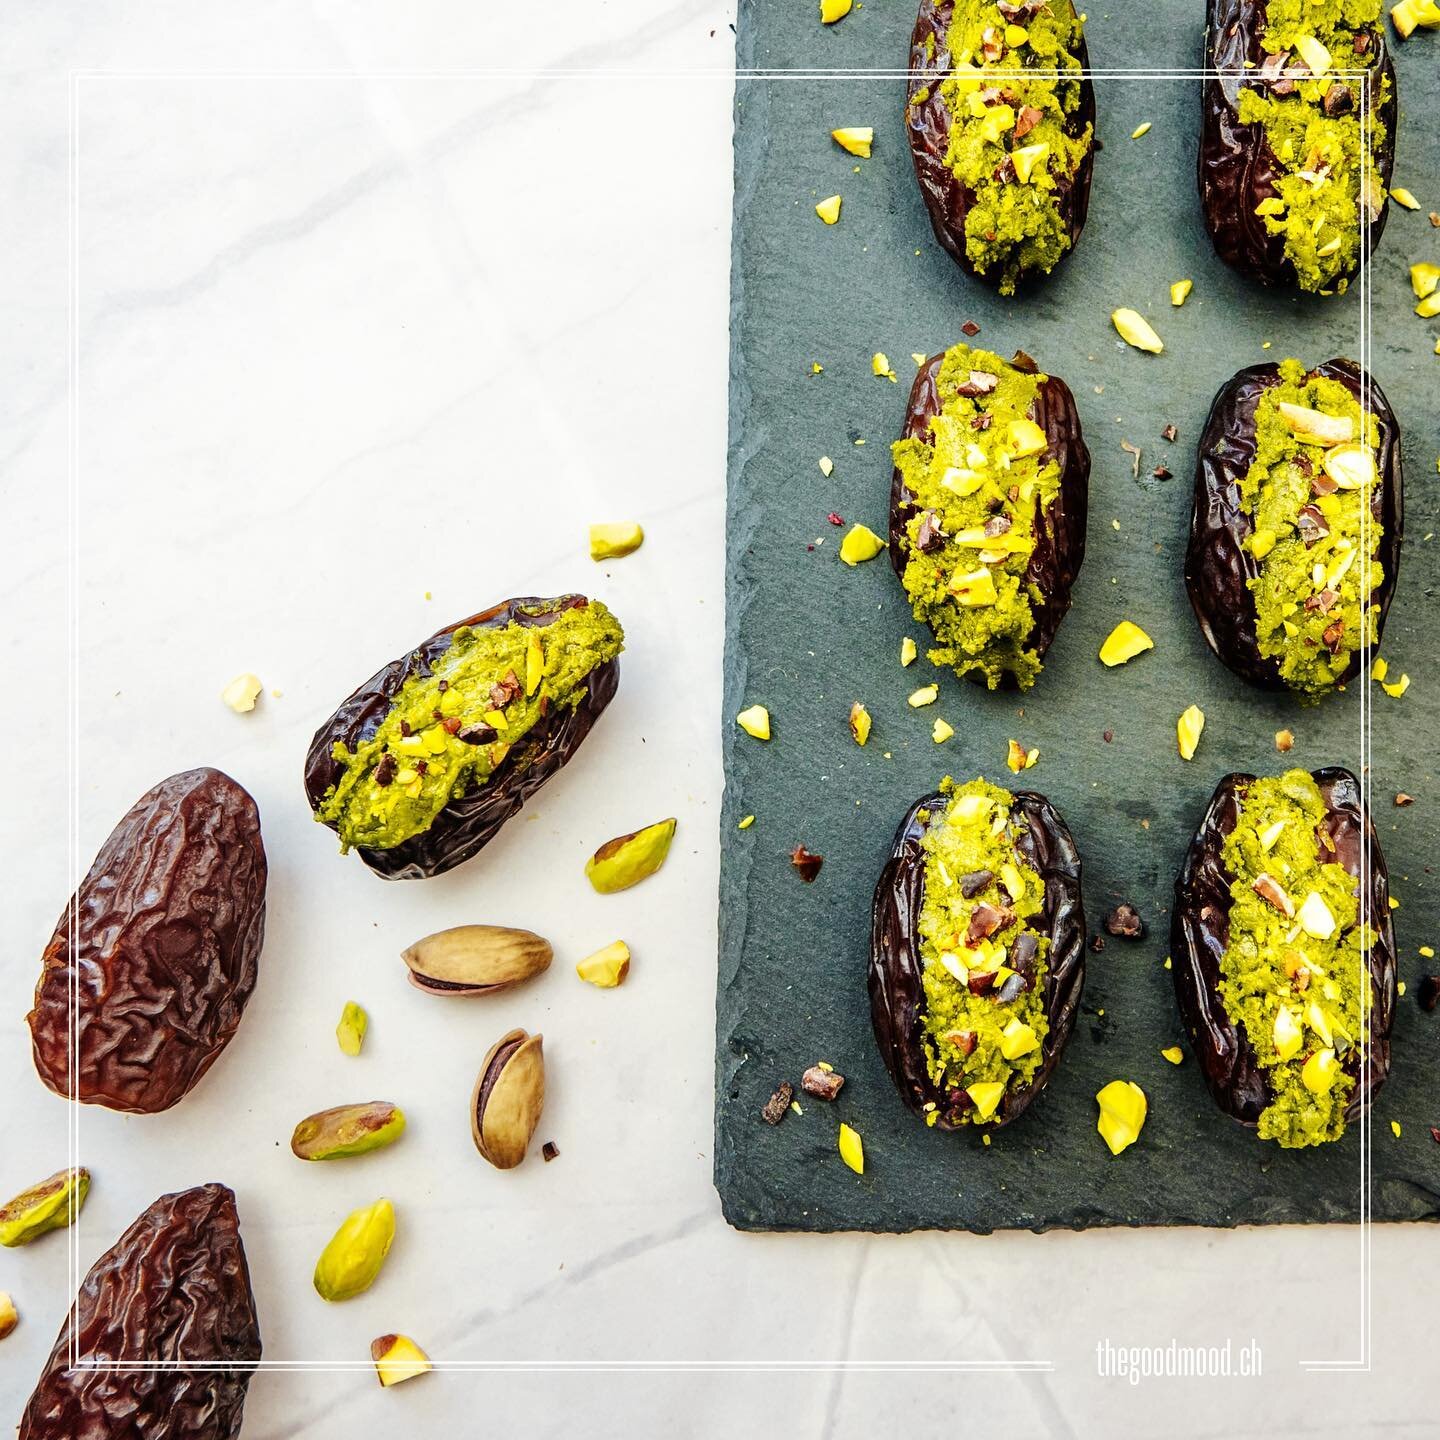 ♡
Pistachio-Lemon Stuffed Dates

Are you looking for a simple sweet snack or dessert? &nbsp;
You are in the right spot. 
These sweeties are made with gooey medjool dates, super creamy pistachio butter from @naturkraftwerke and a hint of lemon &amp; v